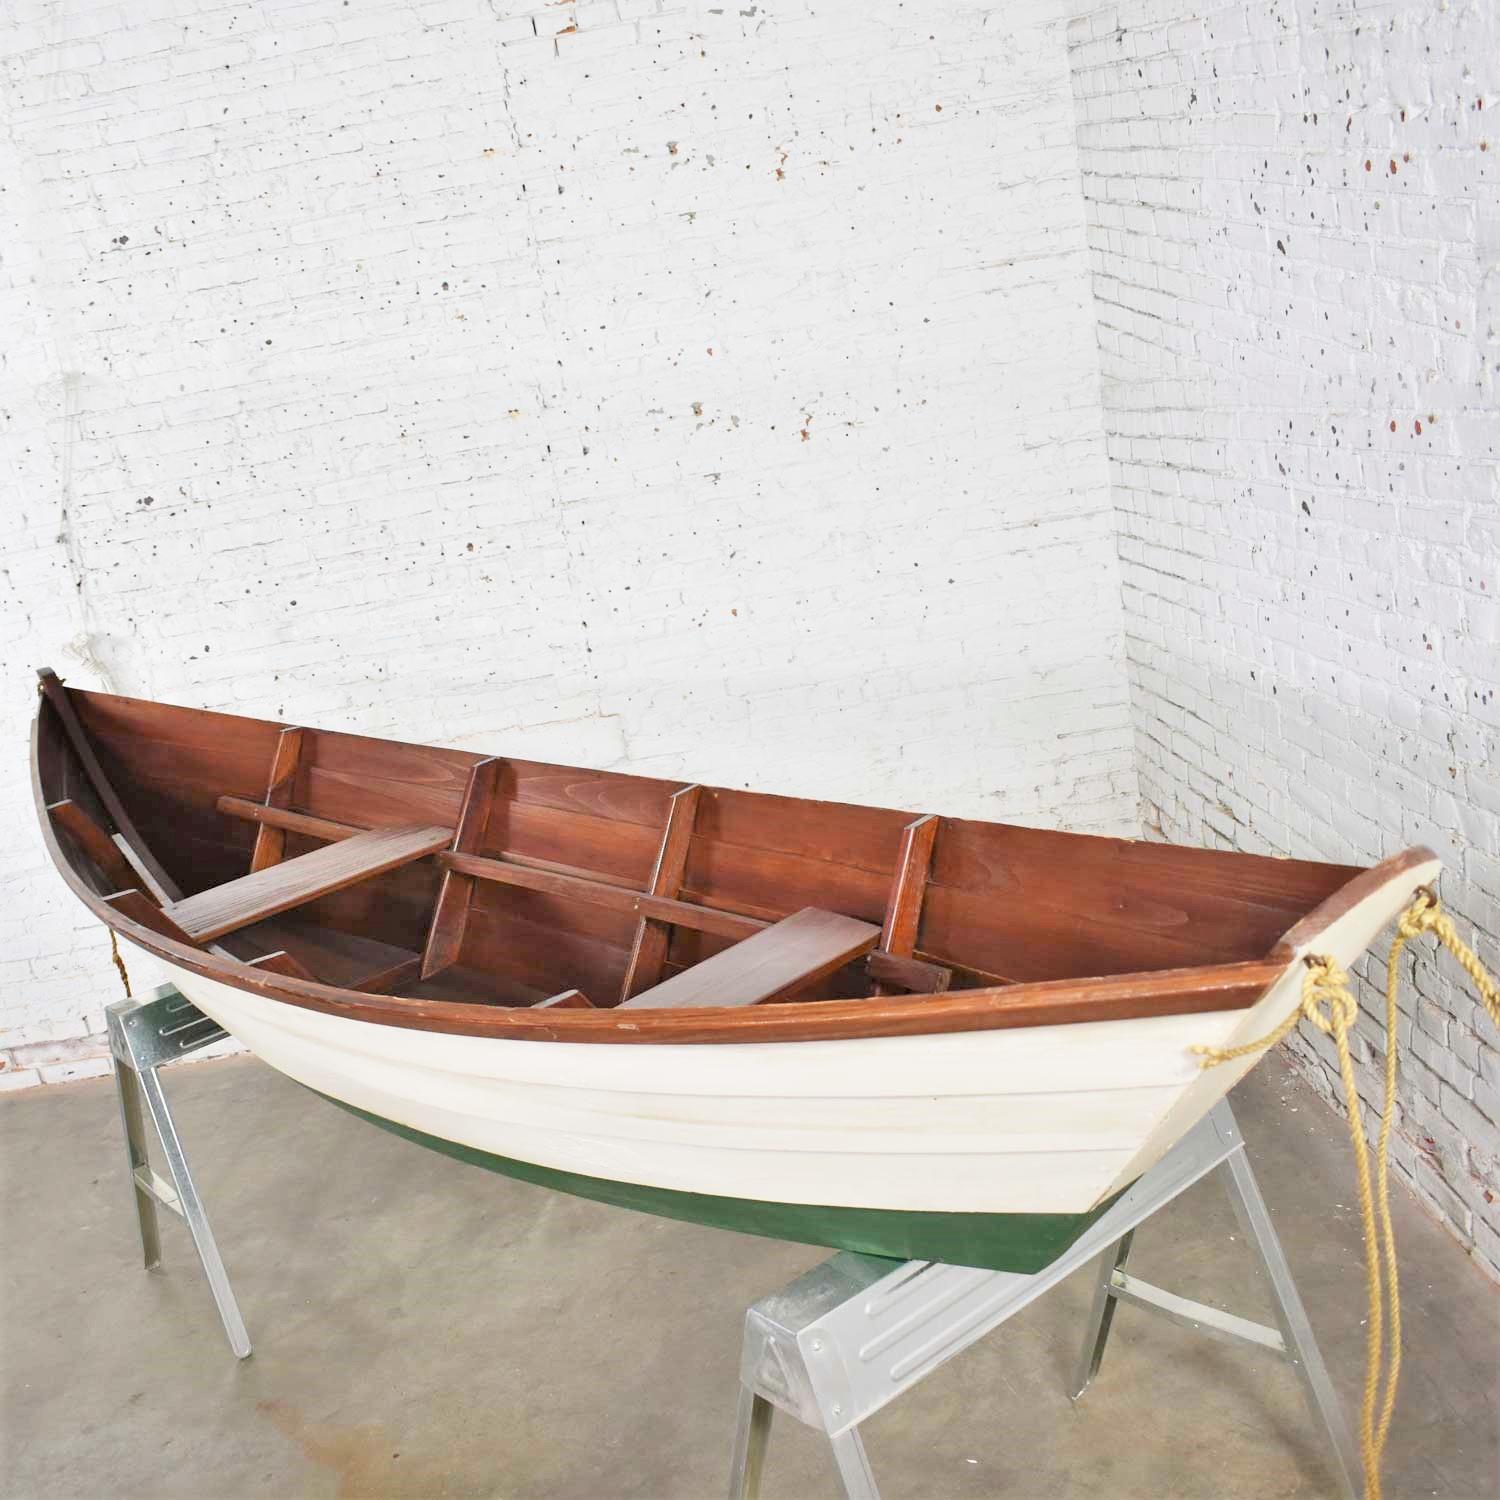 Vintage Wooden Rowboat for Maritime or Nautical Décor 6